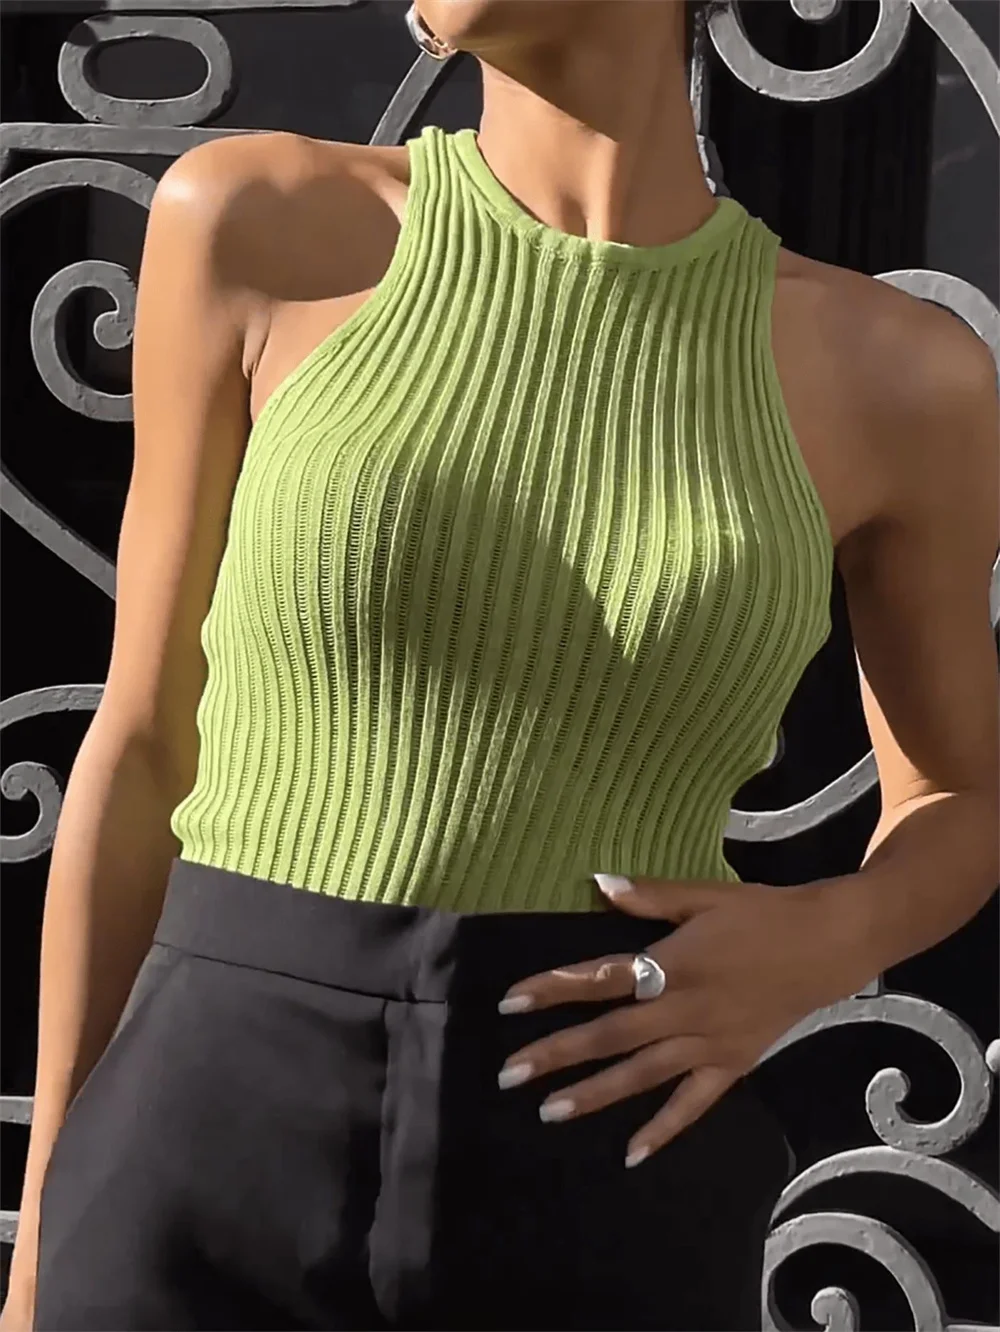 Women Wool Striped See Through Tanks Tops Summer Solid Sexy Sleeveless Elastic Camis Top Clothes New Green Tops